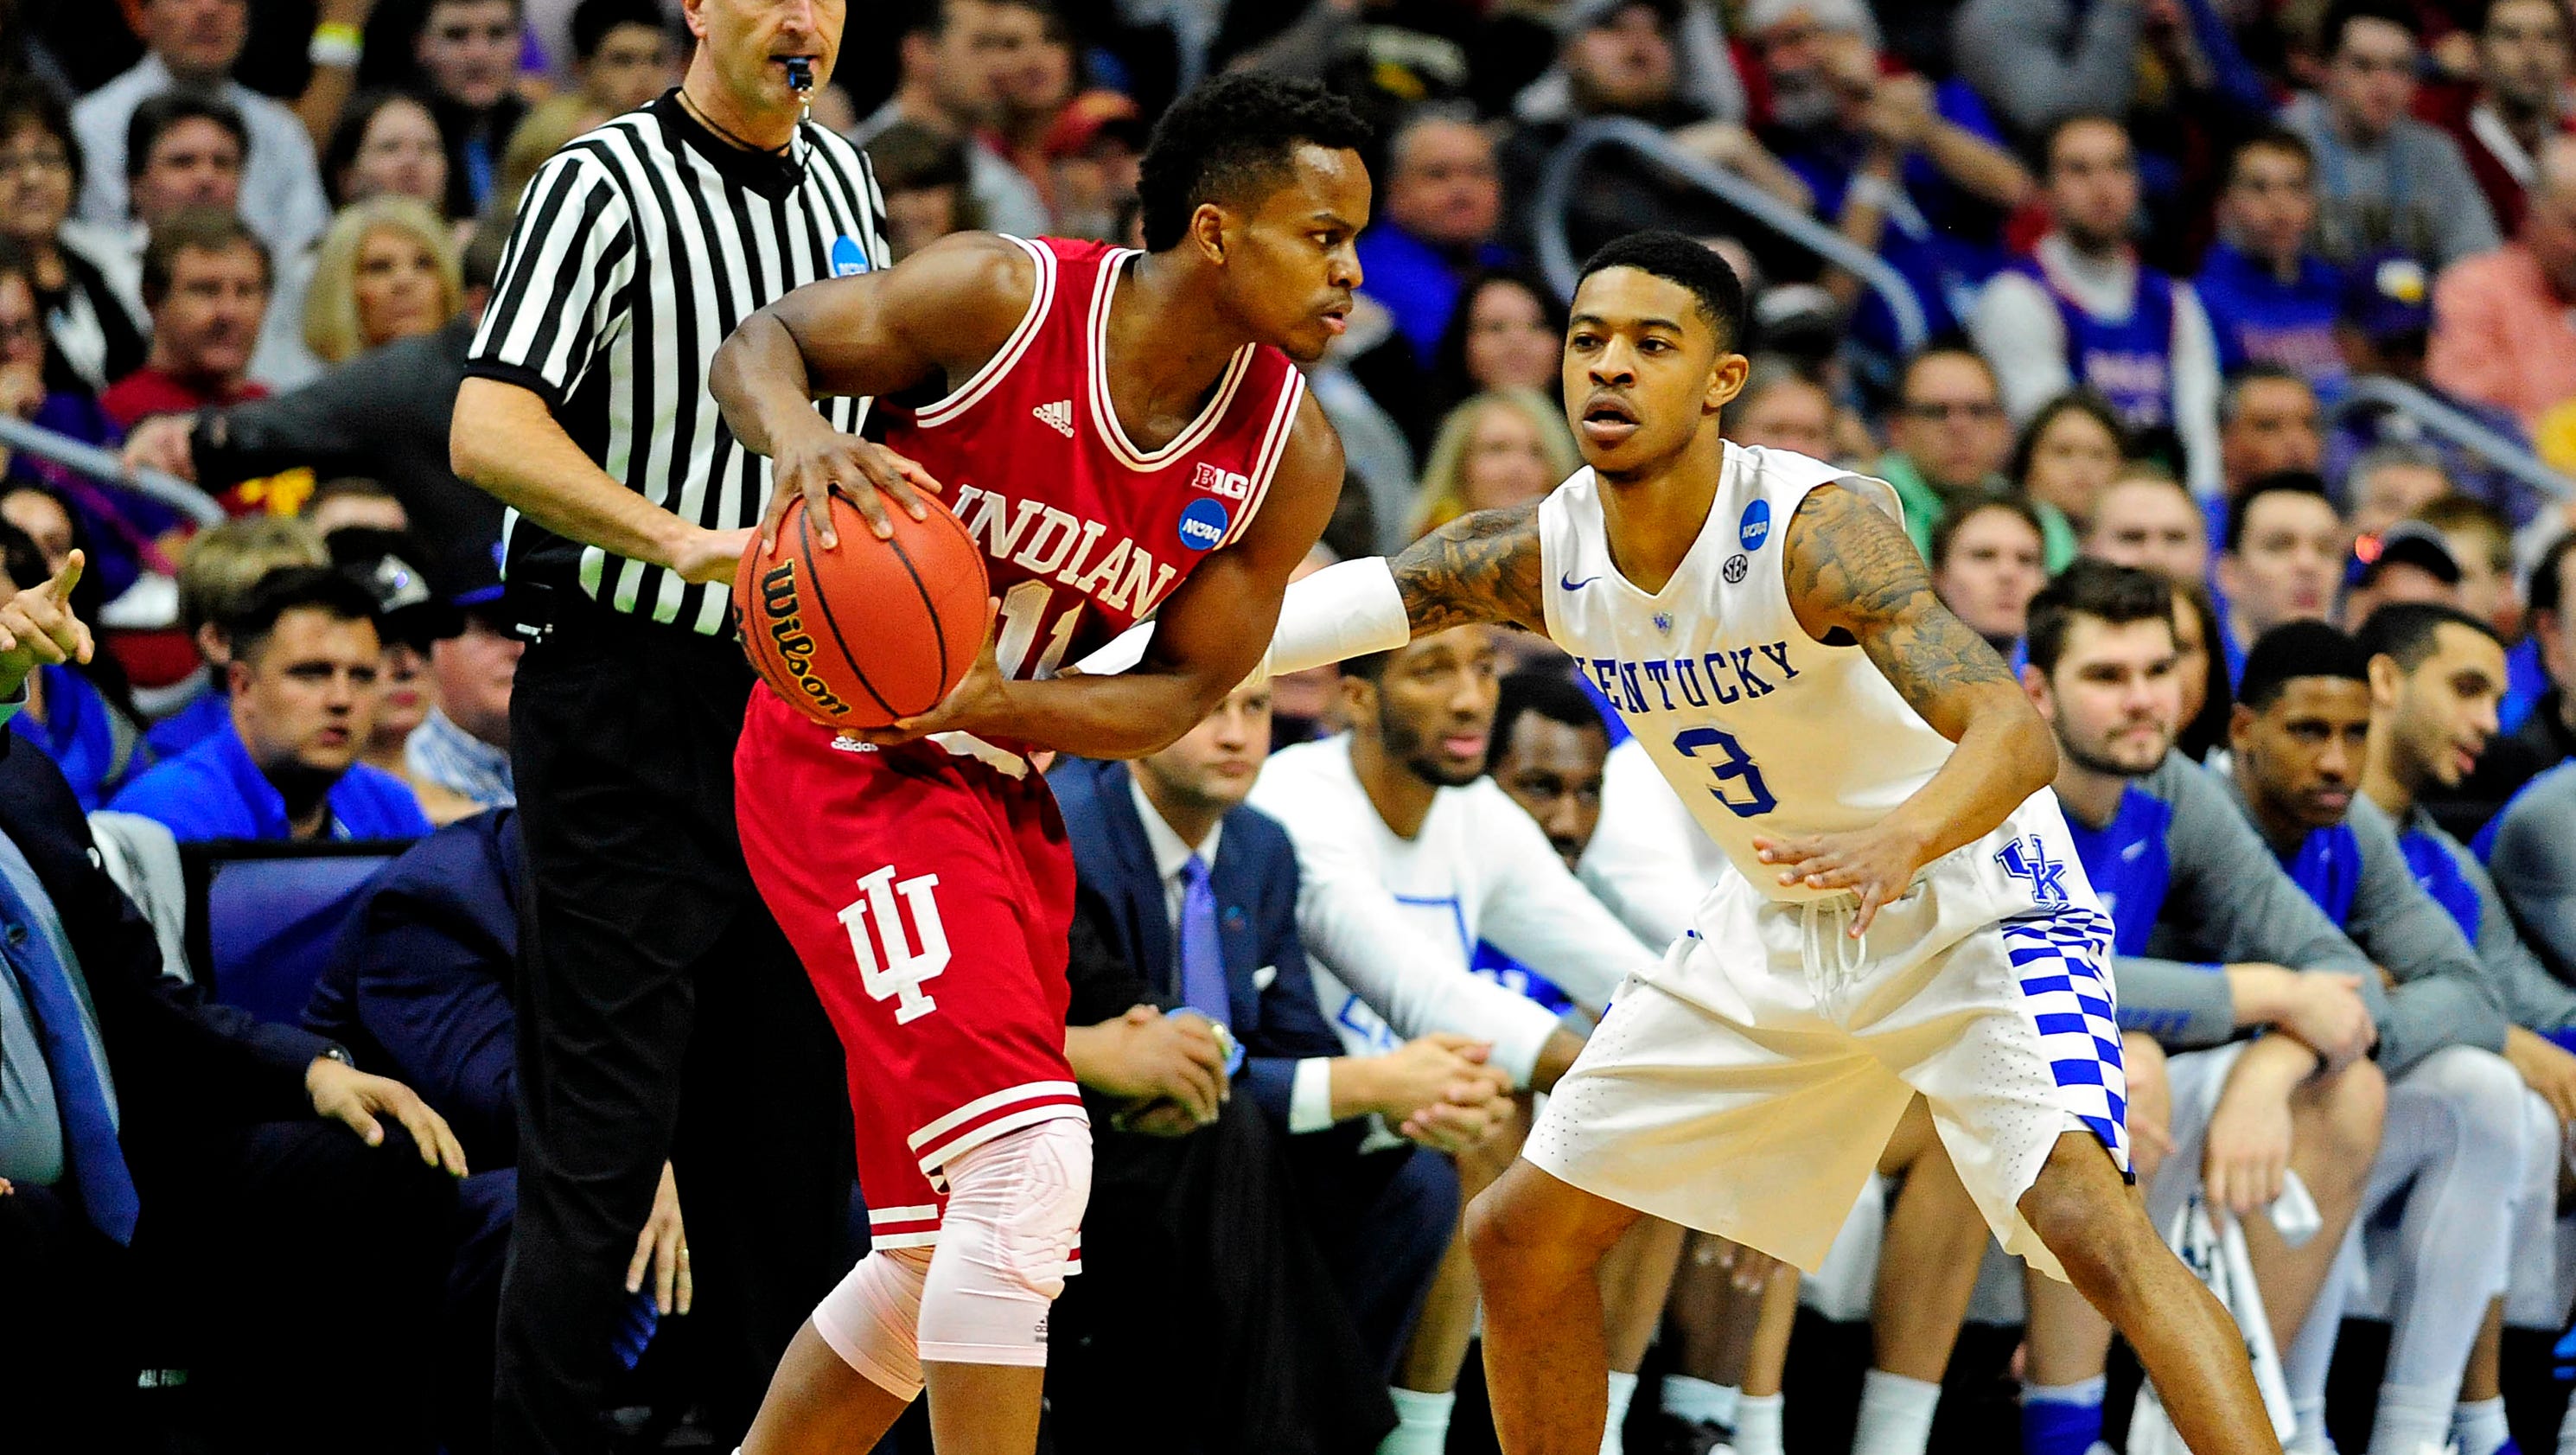 UK Basketball | Live updates from the second-round NCAA tournament game between UK and IU3200 x 1680